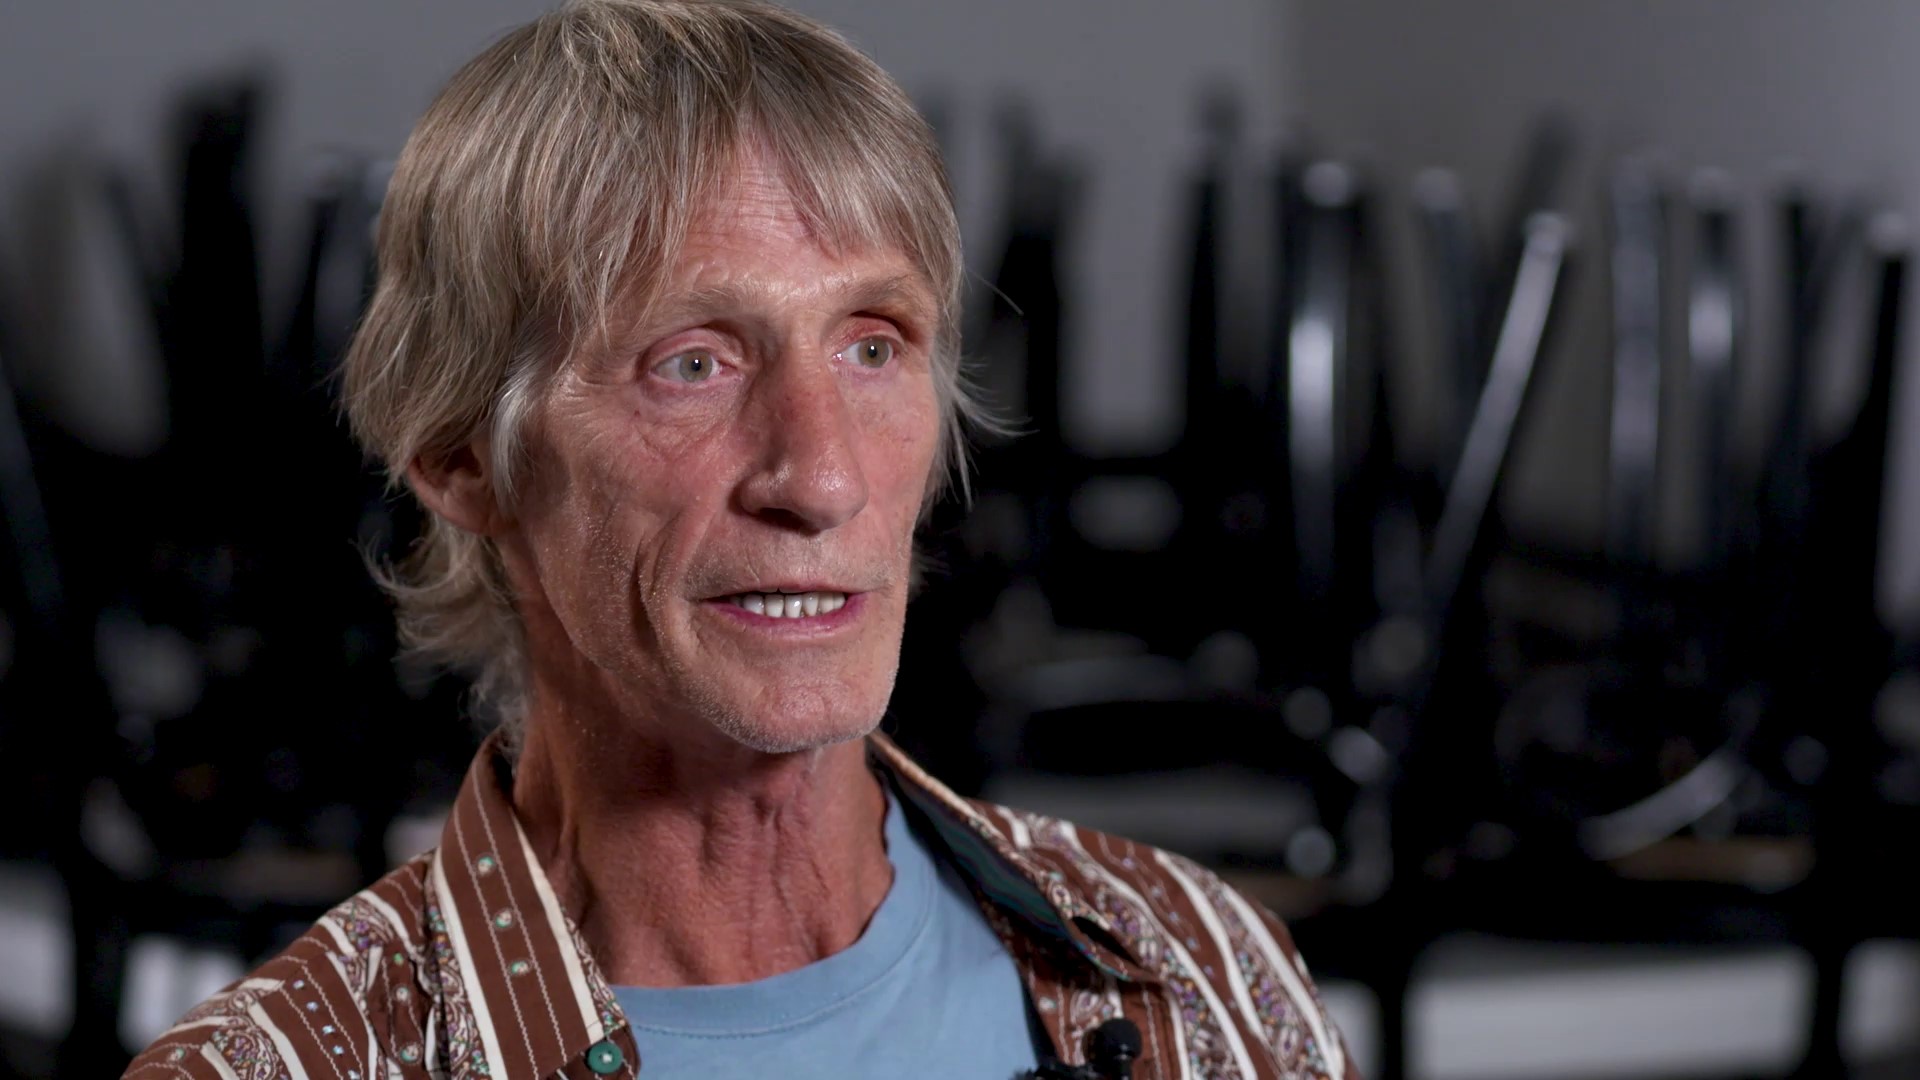 The last surviving brother of the world-famous Von Erich brothers, Kevin Von Erich is sharing lessons he learned from overcoming massive loss and trauma.